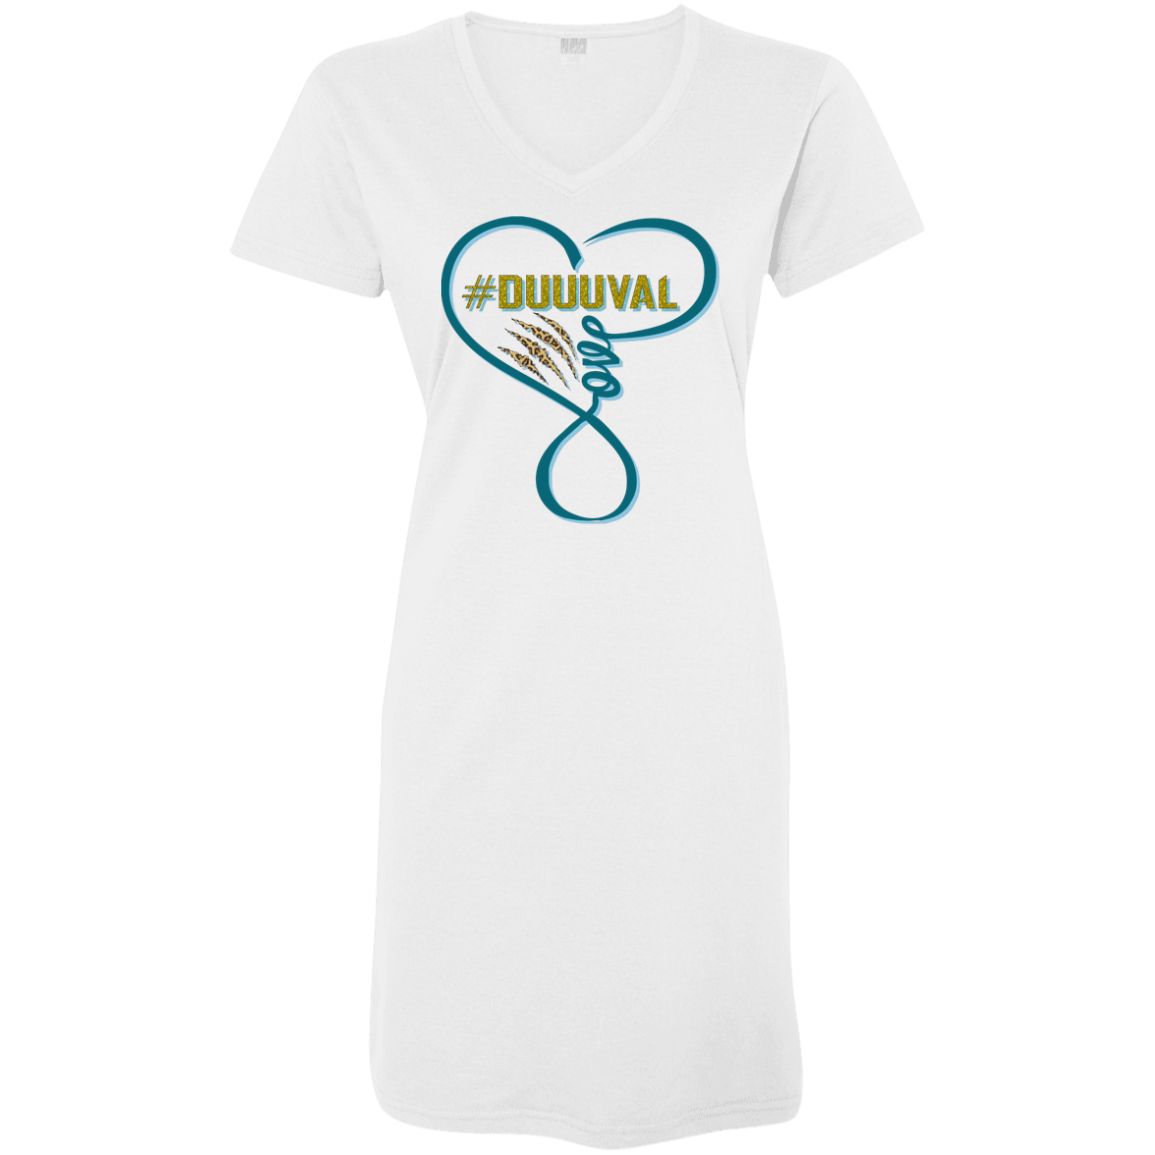 #Duuuval Infinity Heart Jaguars inspired Tee shirt dress V-Neck Fine Jersey Cover-Up